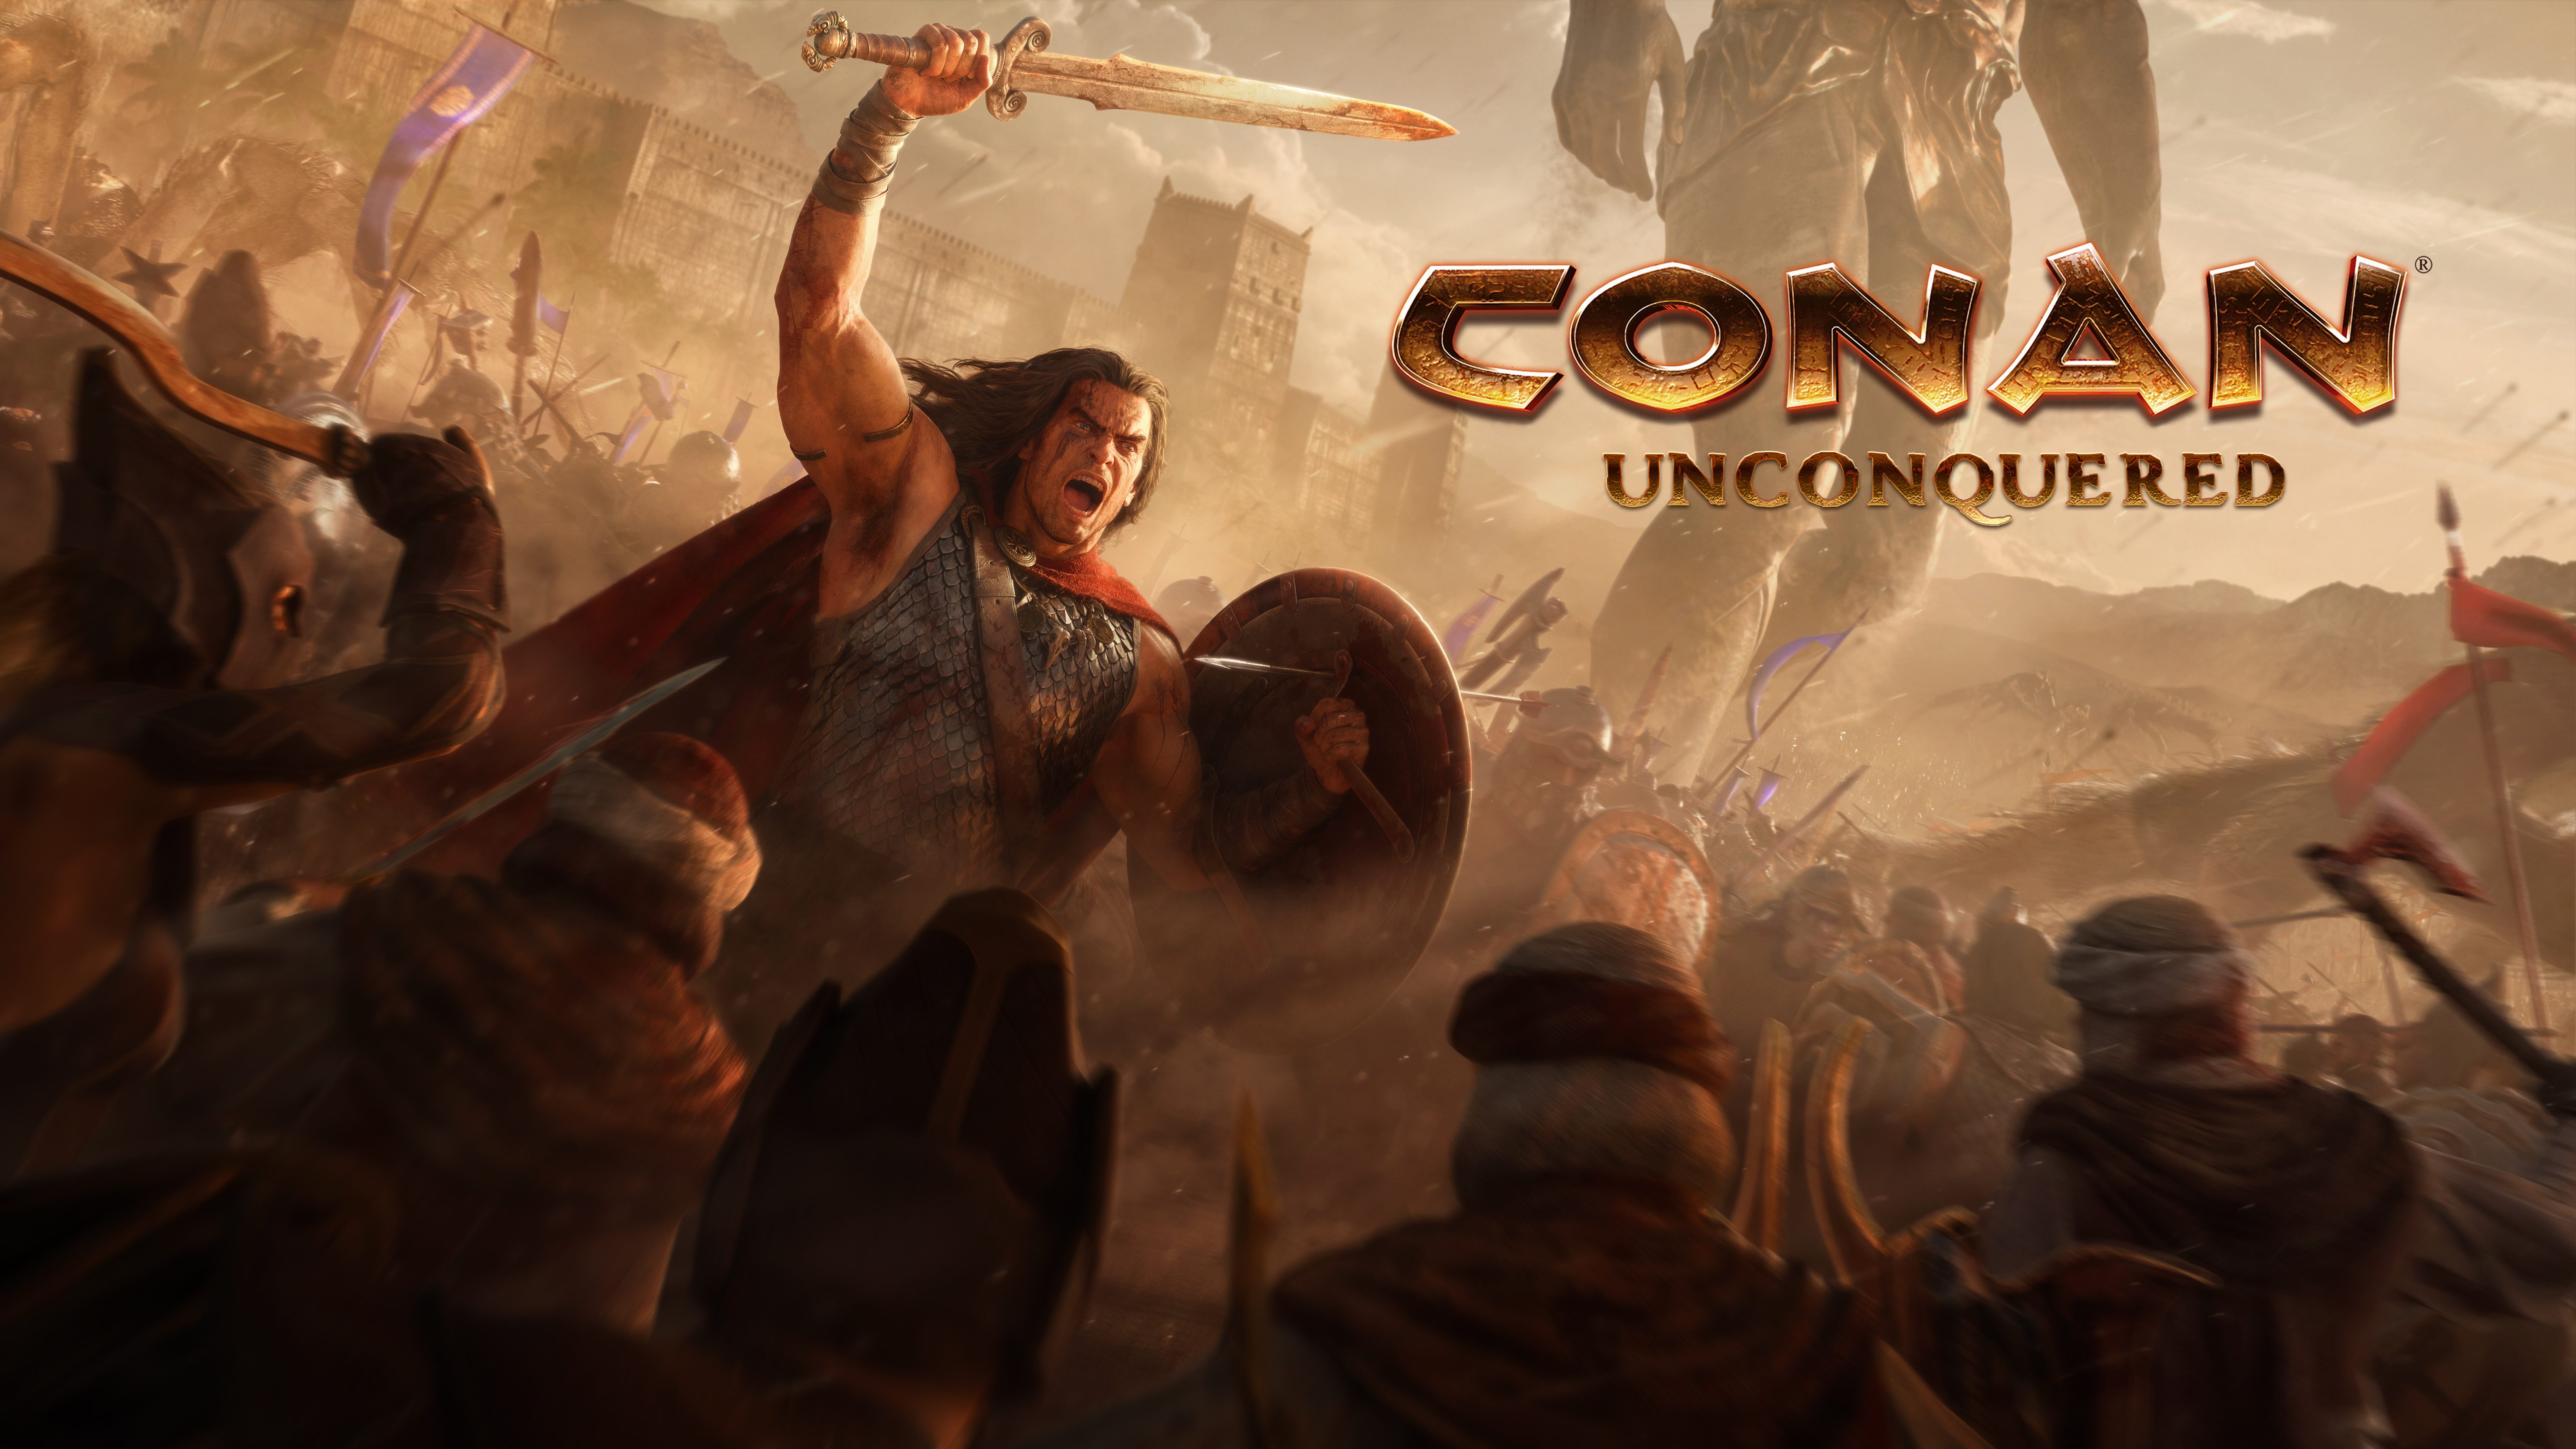 Conan RTS game from Command & Conquer vets in development